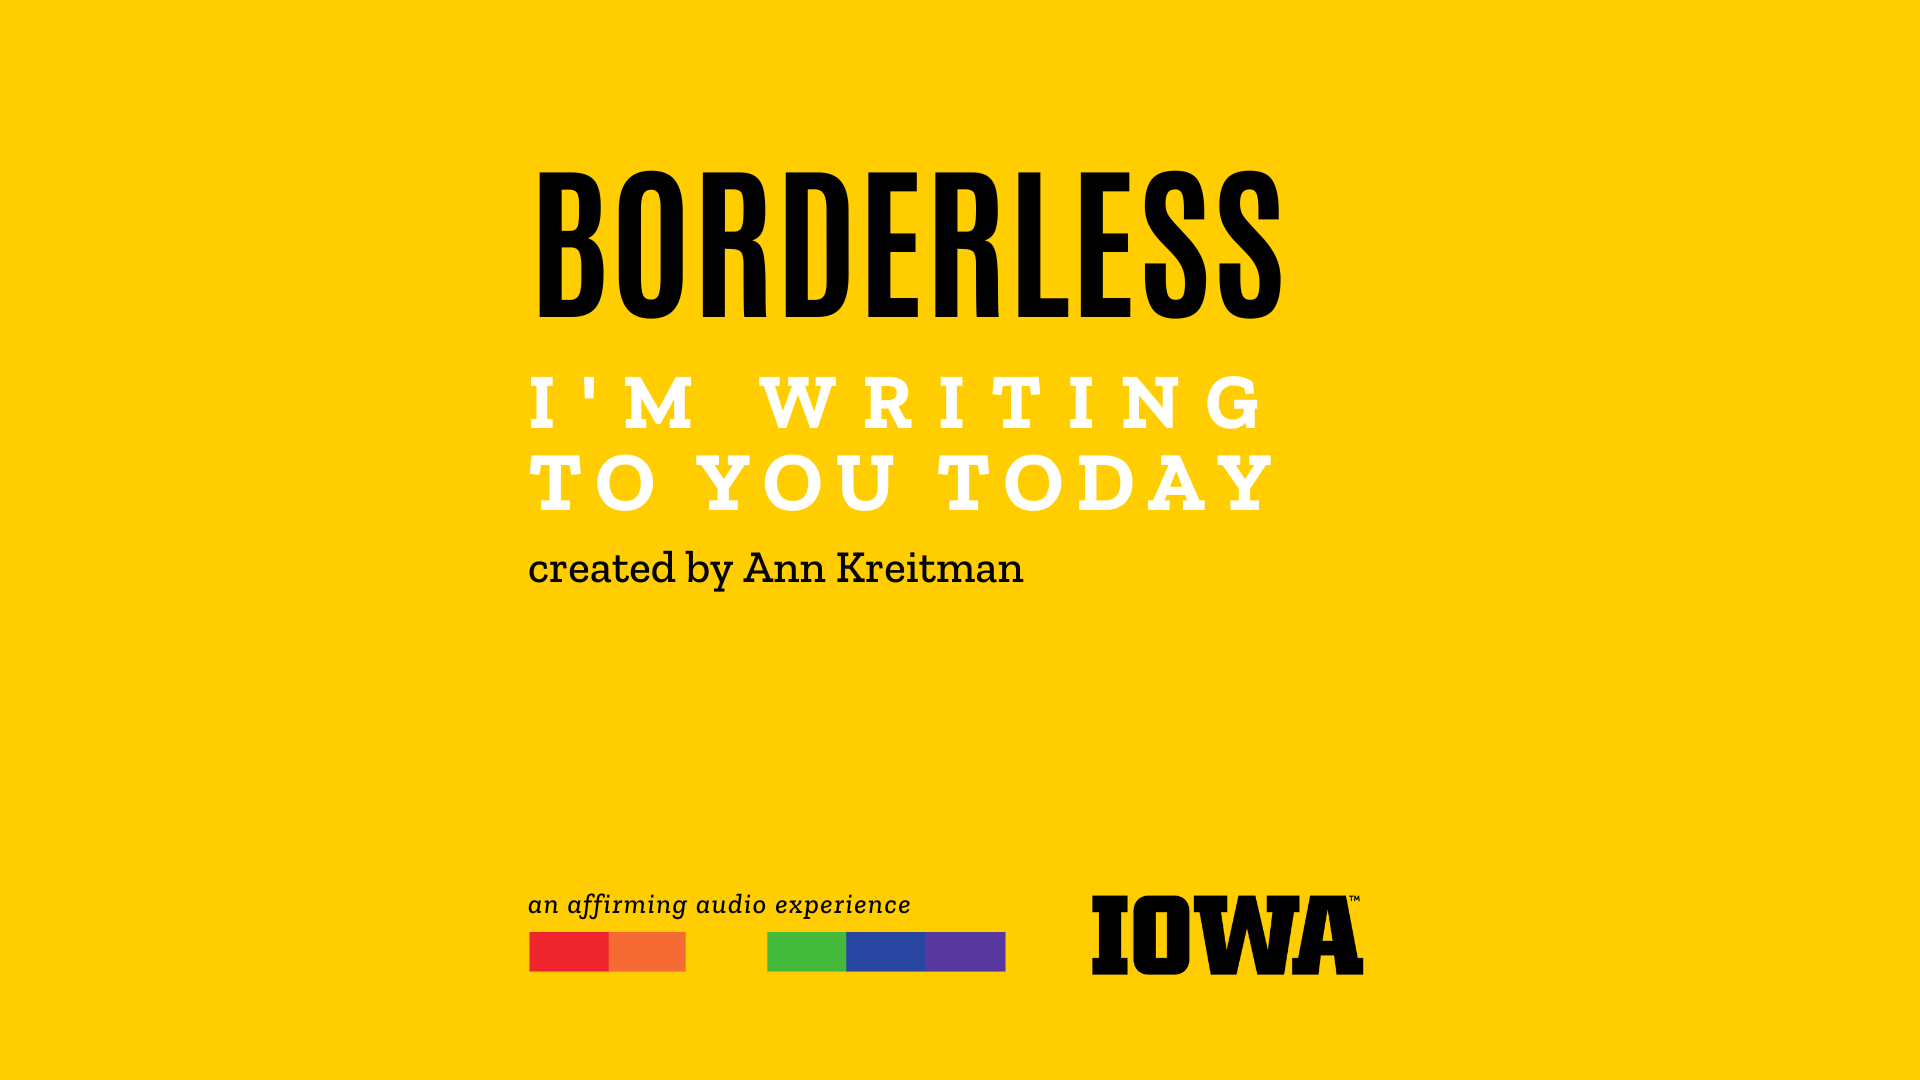 Borderless - I'm Writing to You Today: an affirmative audio experience